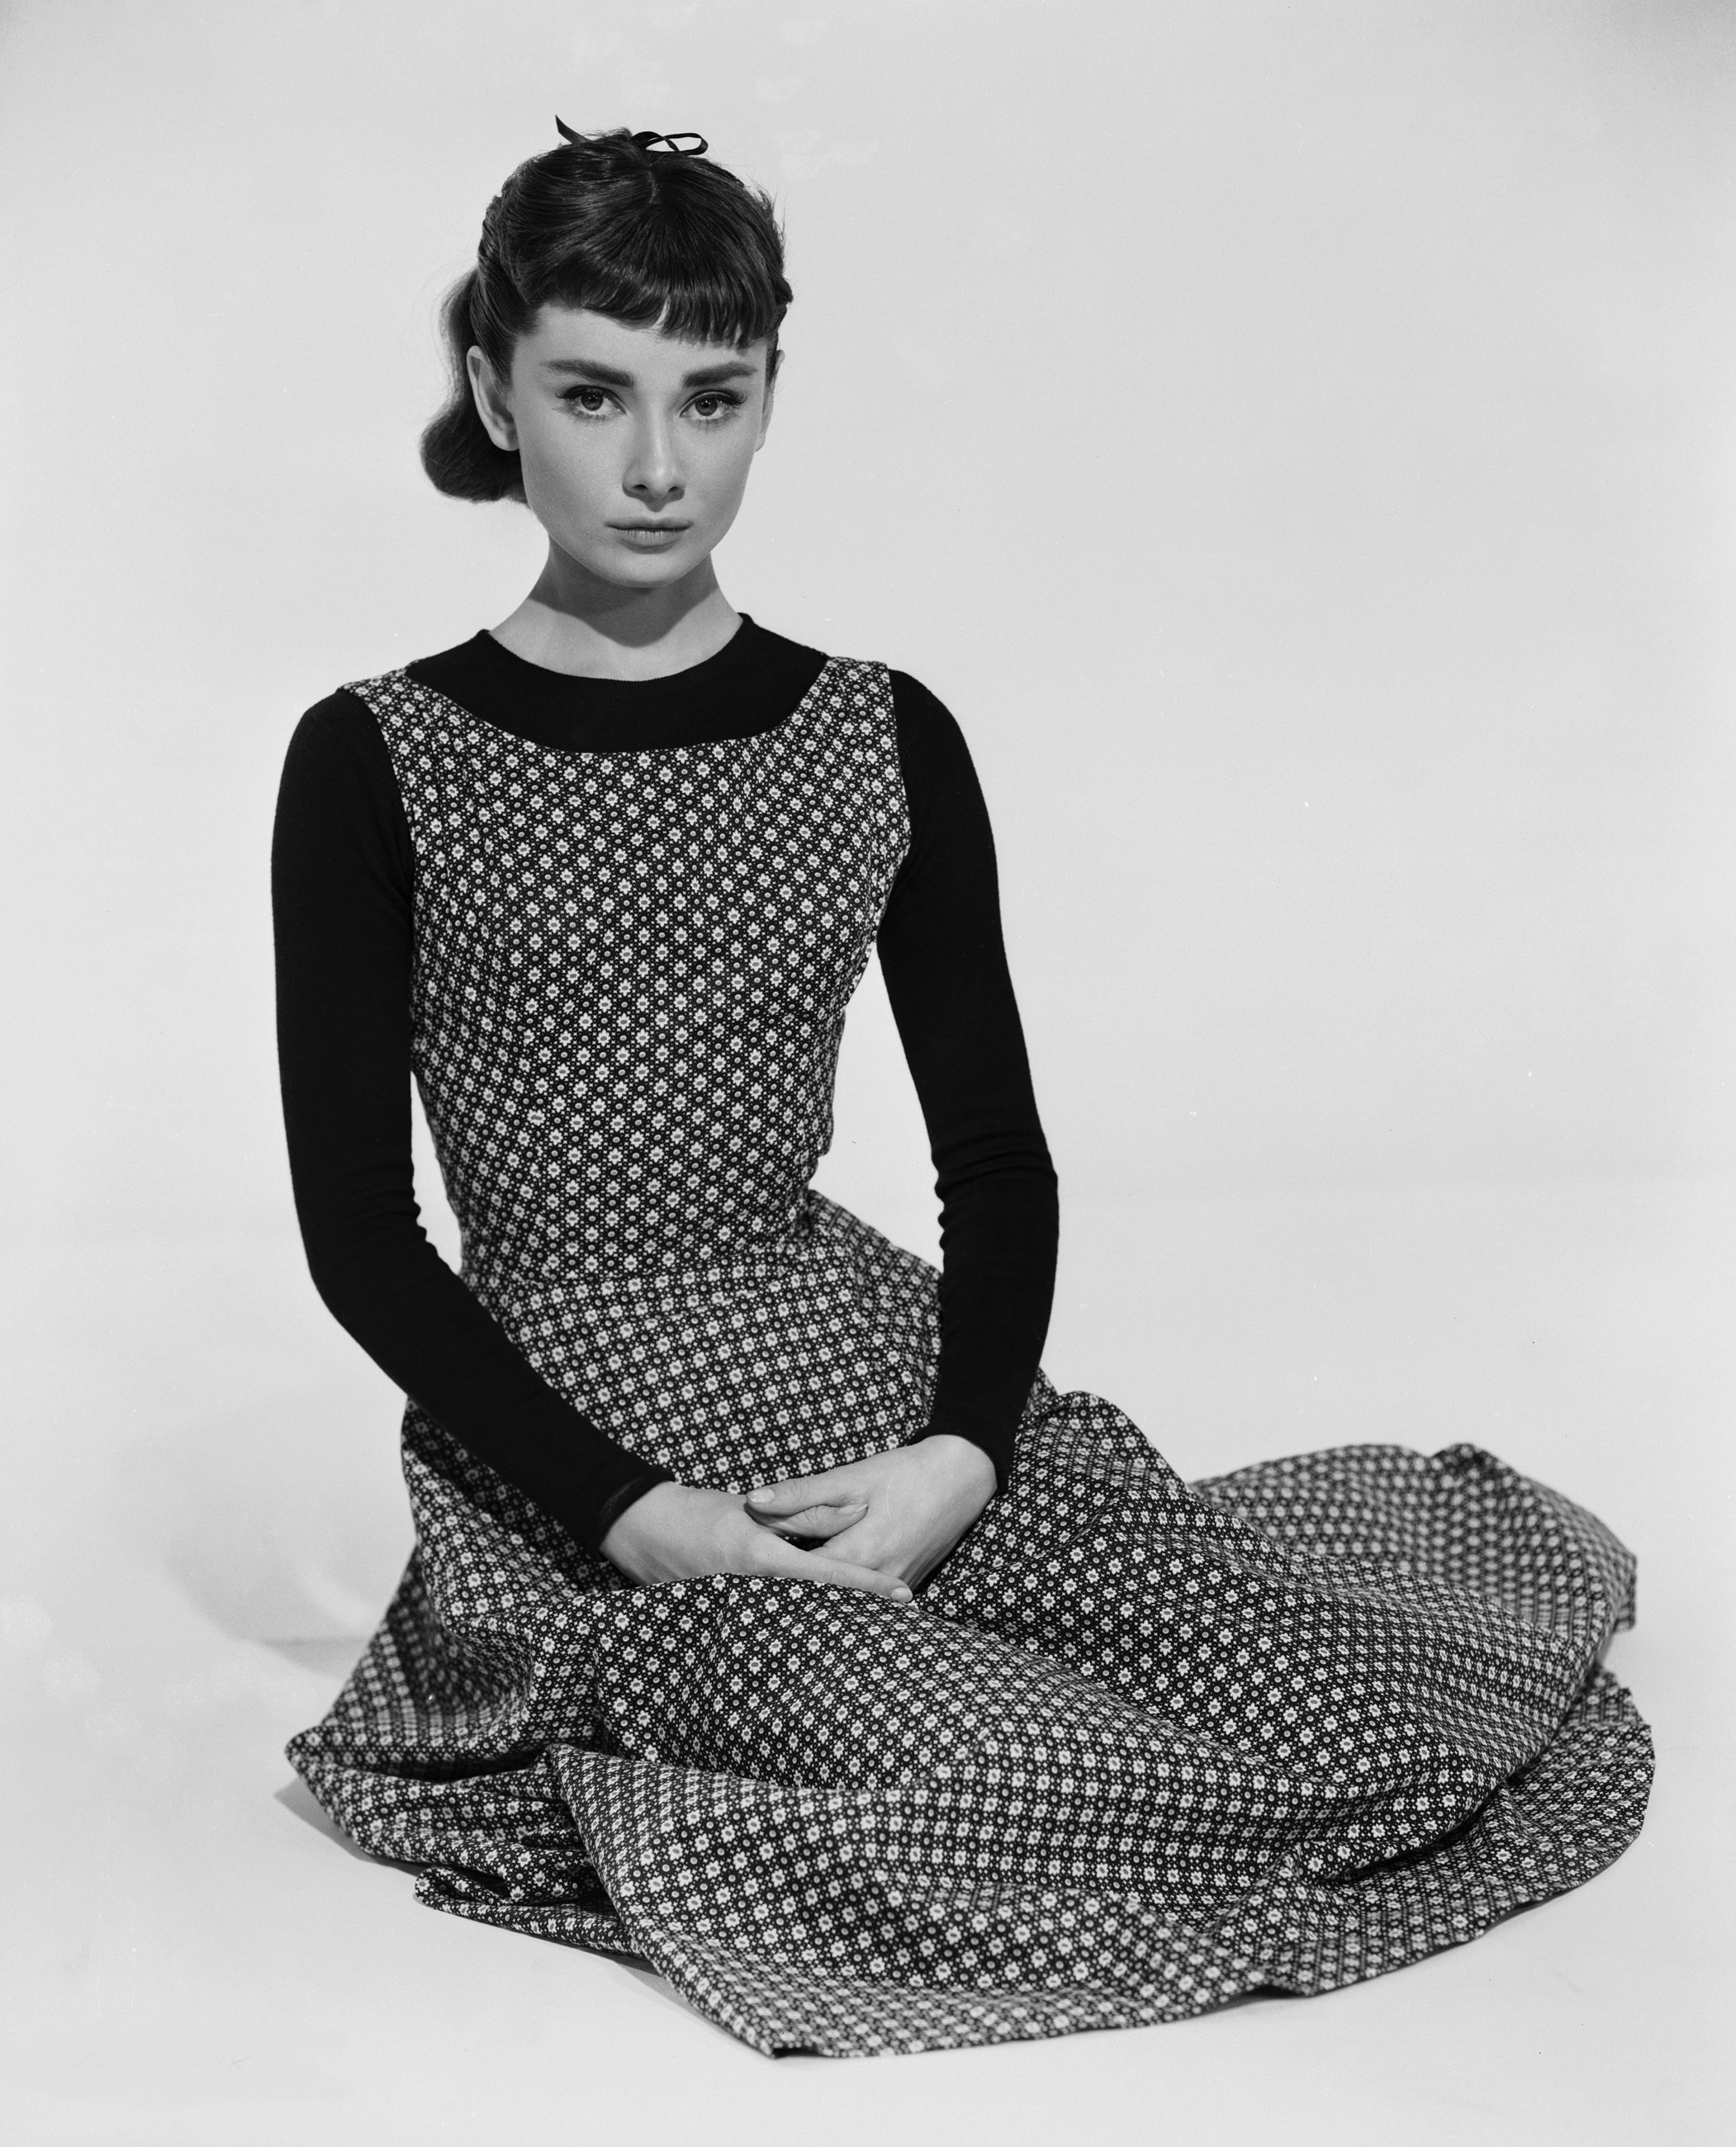 Style inspiration from Sabrina, Iconic fashion moments, Audrey Hepburn's chic looks, Timeless elegance, 2110x2600 HD Handy